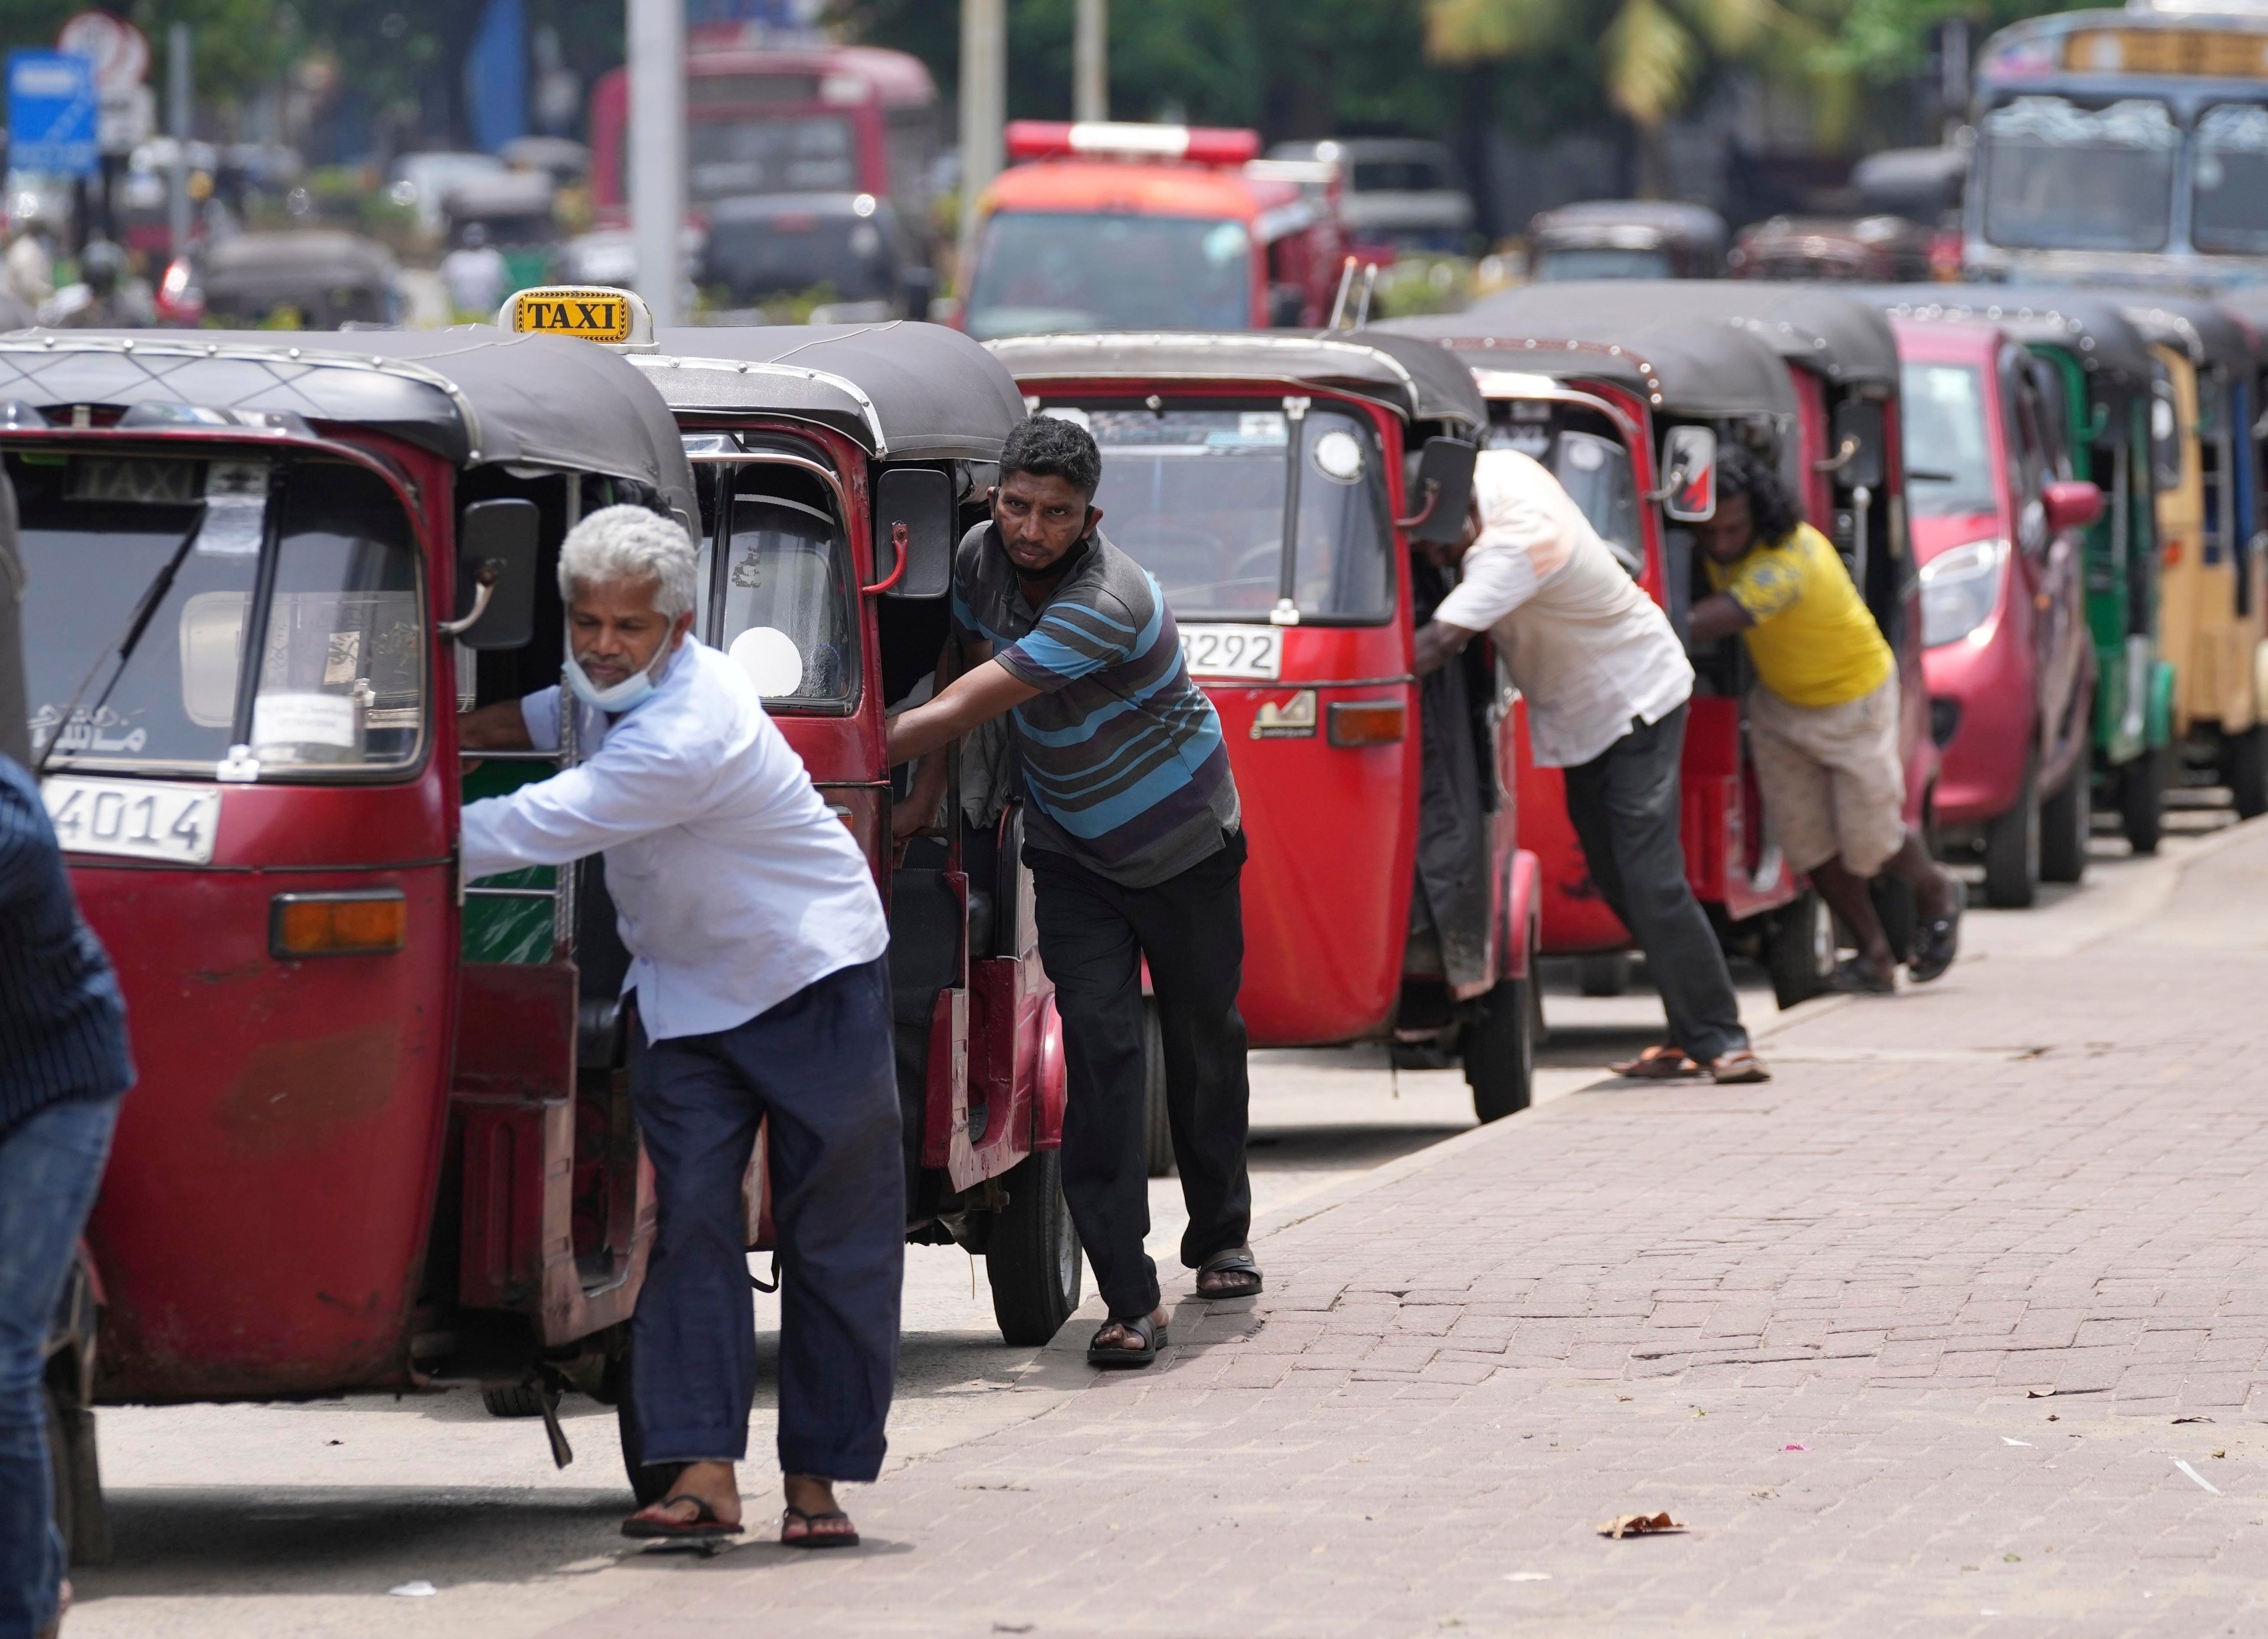 Drivers push their auto rickshaws to a petrol station in Colombo earlier this year as the crisis severely restricted Sri Lanka’s ability to import fuel. Photo: AP